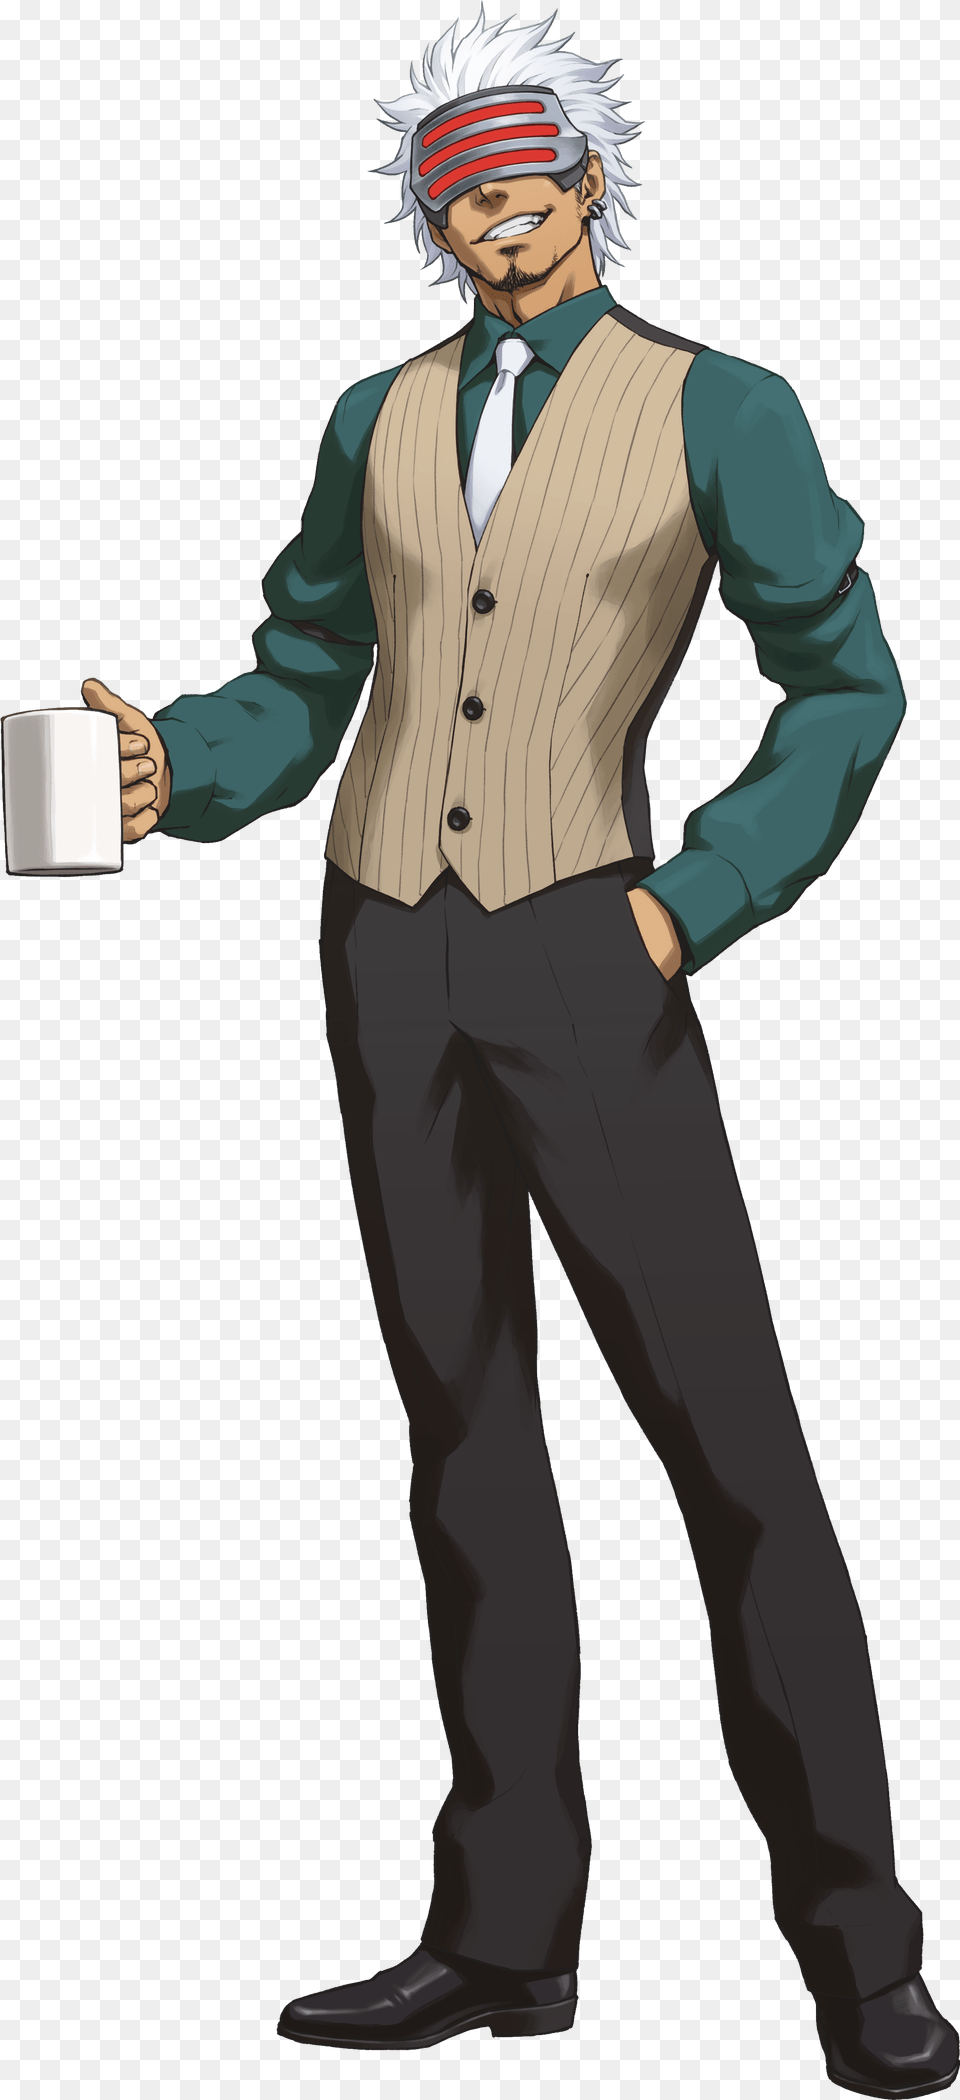 For Christmas You Guys Are Getting A Phoenix Wright Smash Godot Ace Attorney Design, Vest, Suit, Clothing, Formal Wear Png